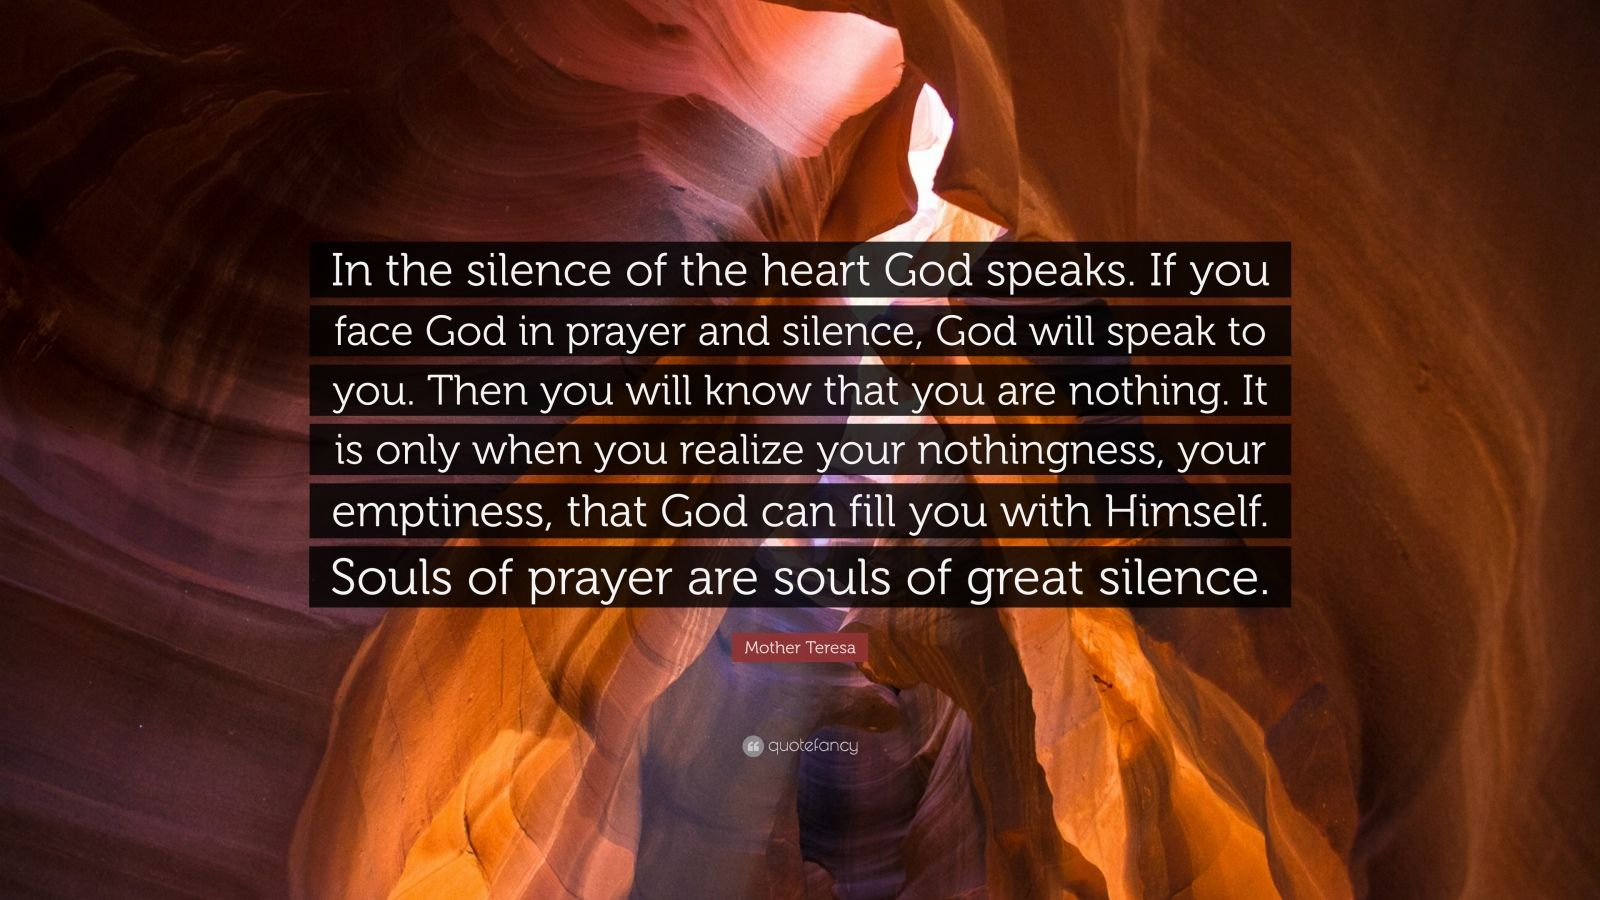 Mother Teresa Quote “In the silence of the heart God speaks If you